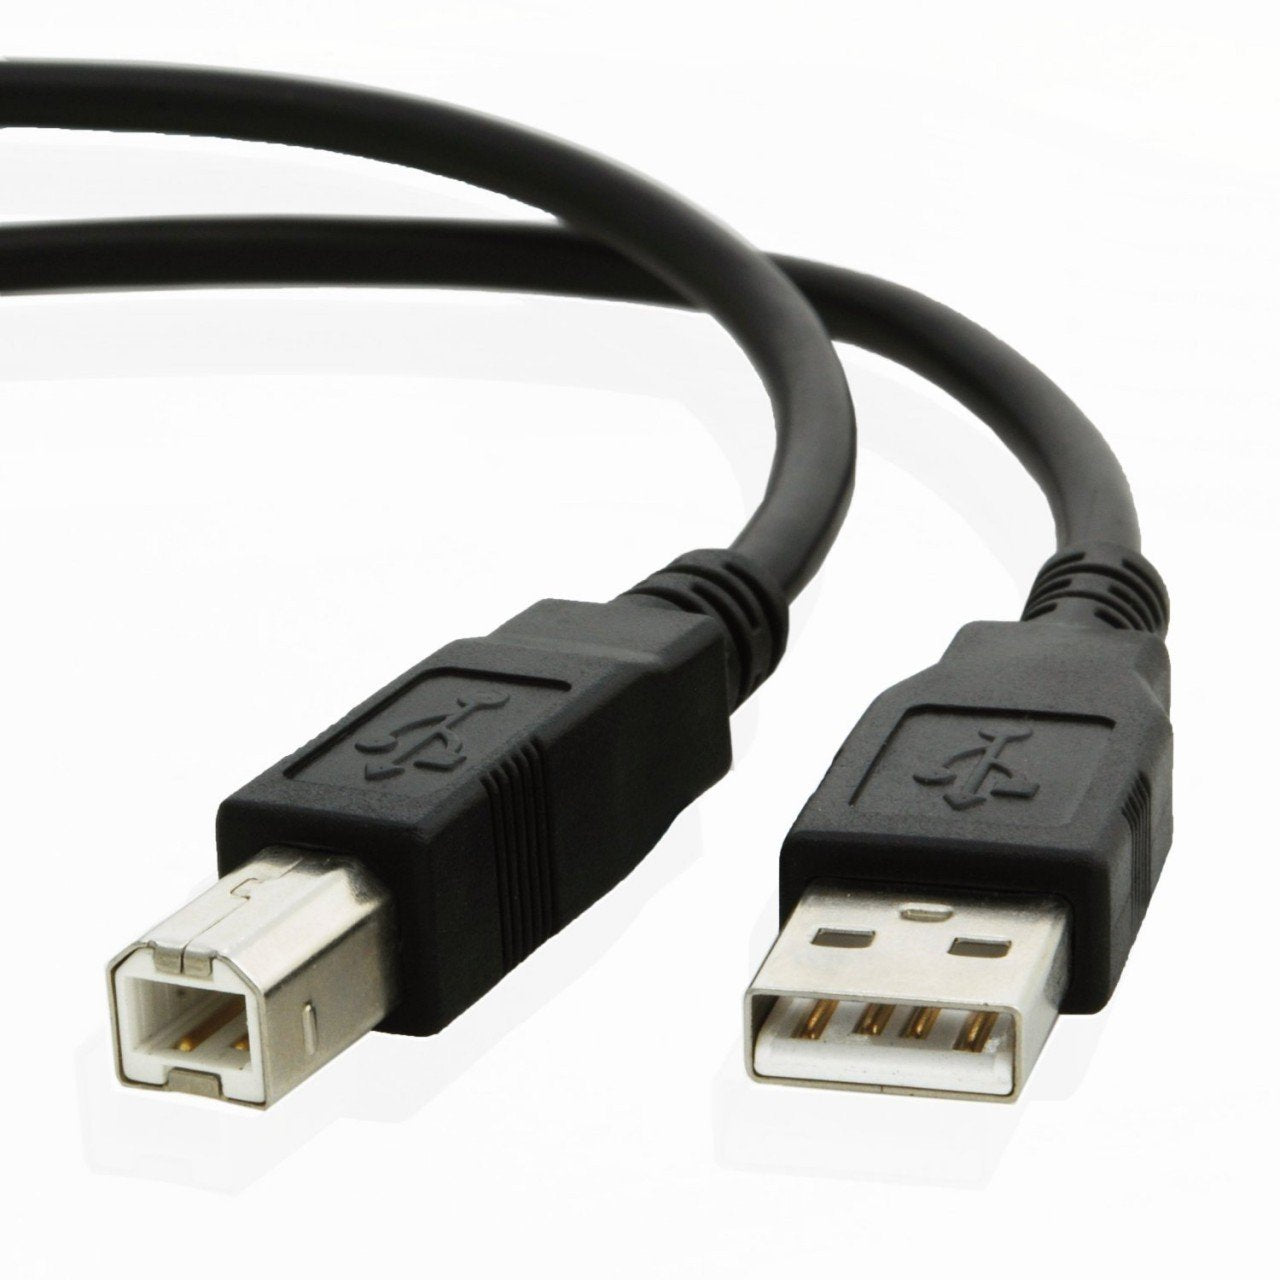 USB cable for Brother MFC-9130CW